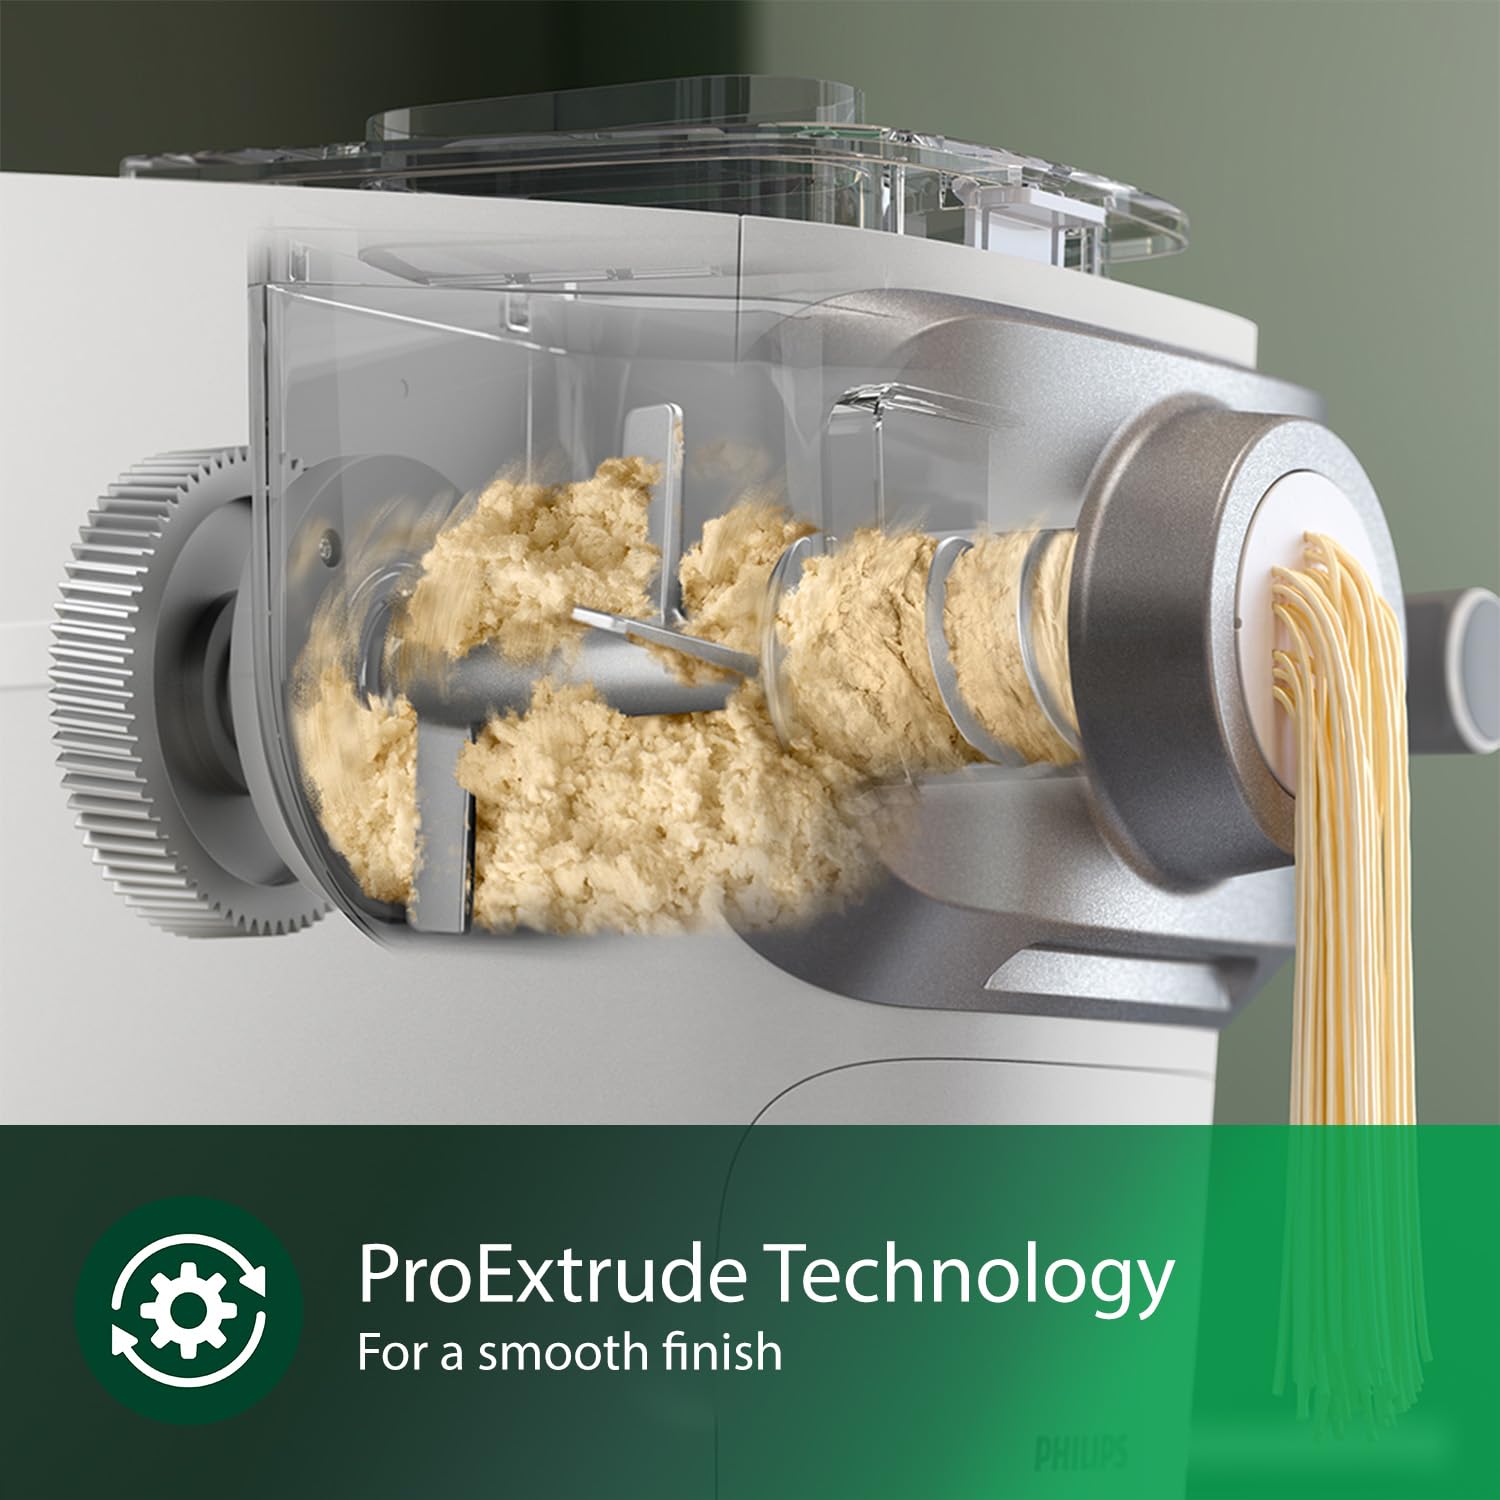 Philips 7000 Series Pasta Maker, ProExtrude Technology 150W, 8 discs, Up to 8 Portions, NutriU App, White, (HR2660/03)